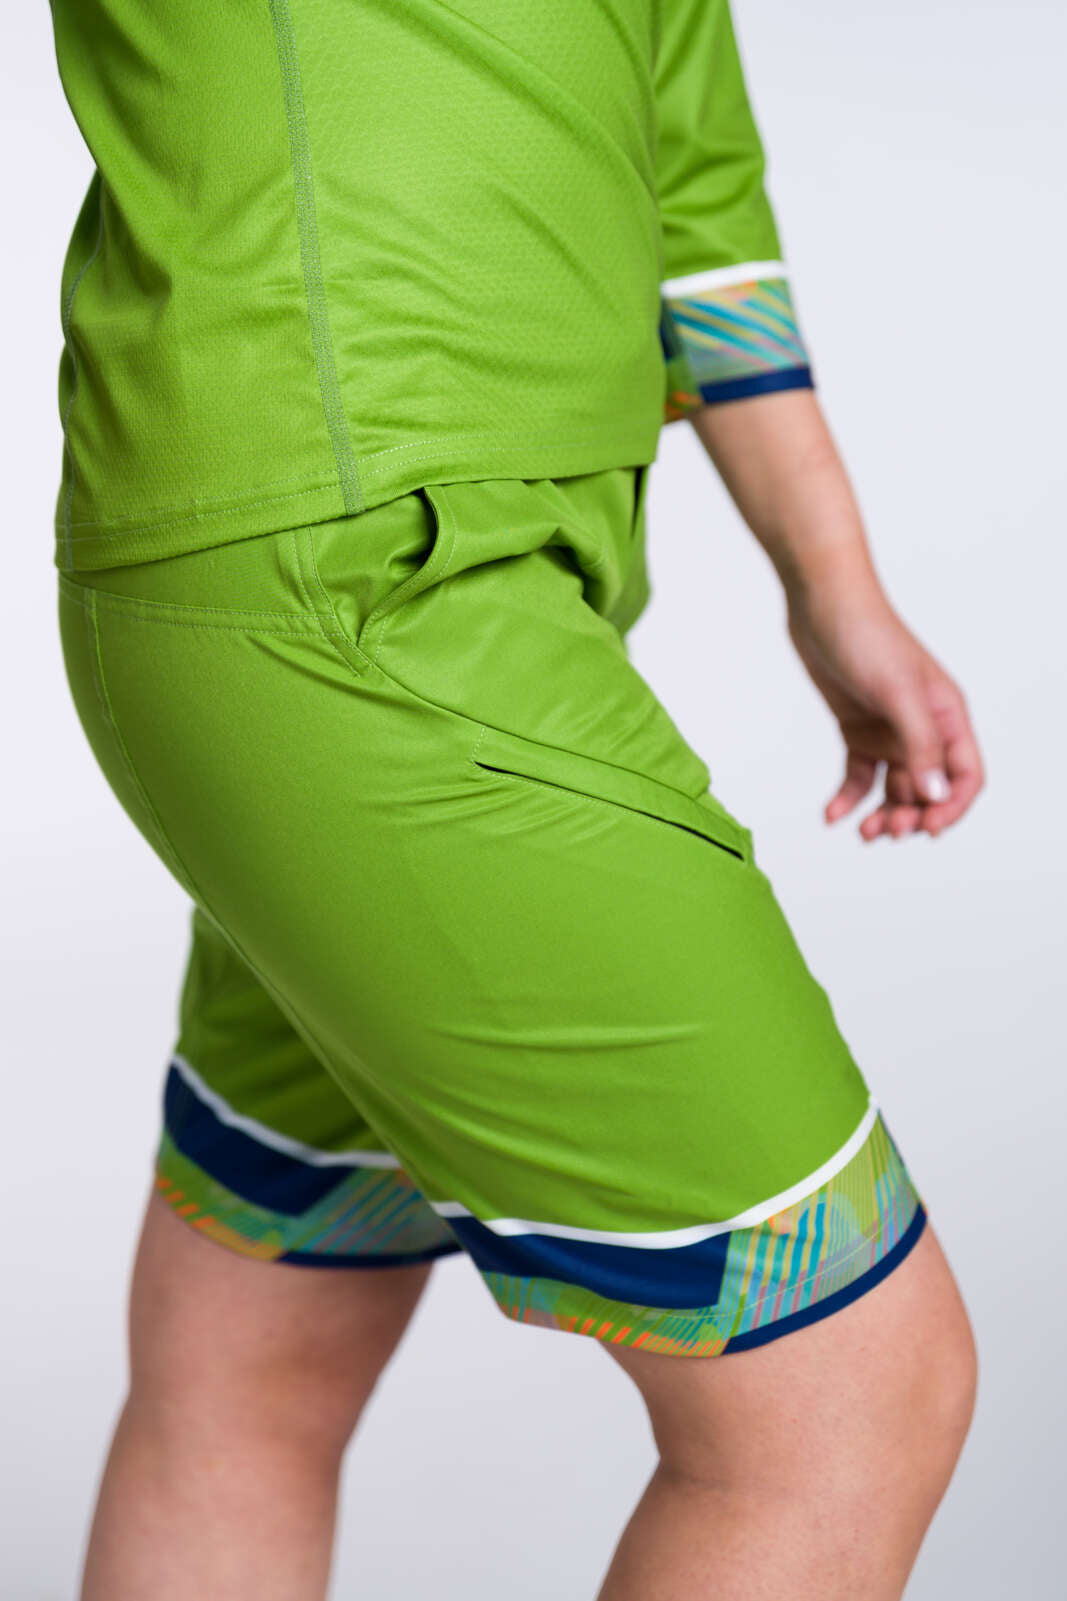 Women's Apex Mountain Bike Shorts Side View #color-options_fully-printed